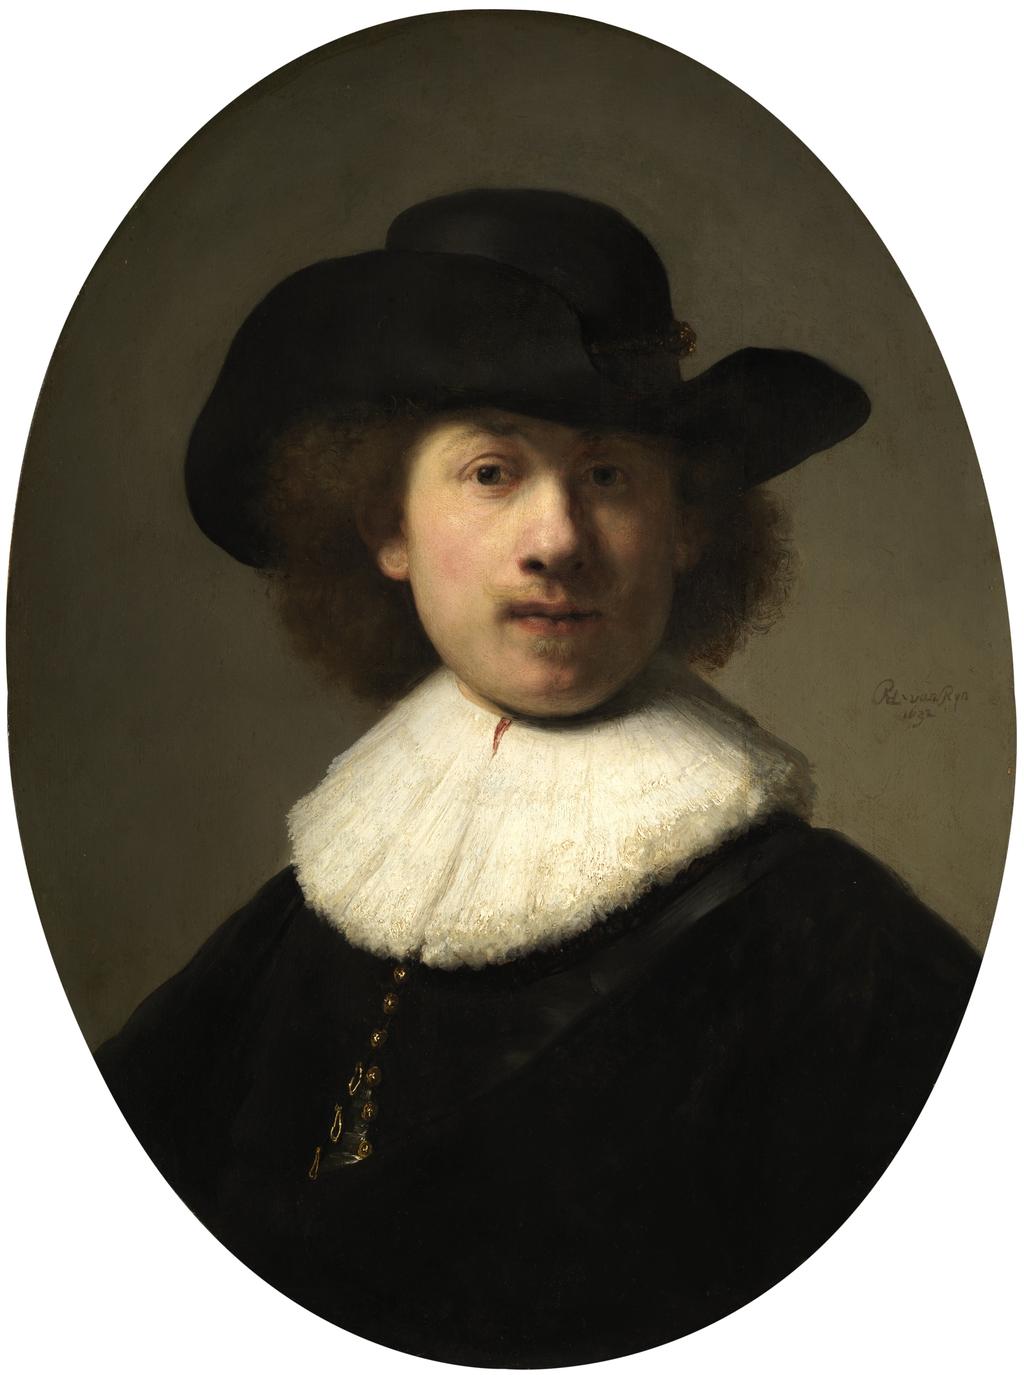 Page 3 of 10 This image of the young Rembrandt van Rijn, proud in bearing as he Comparative Figures gazes directly out at the viewer from within an oval framing device, is not easily forgotten.